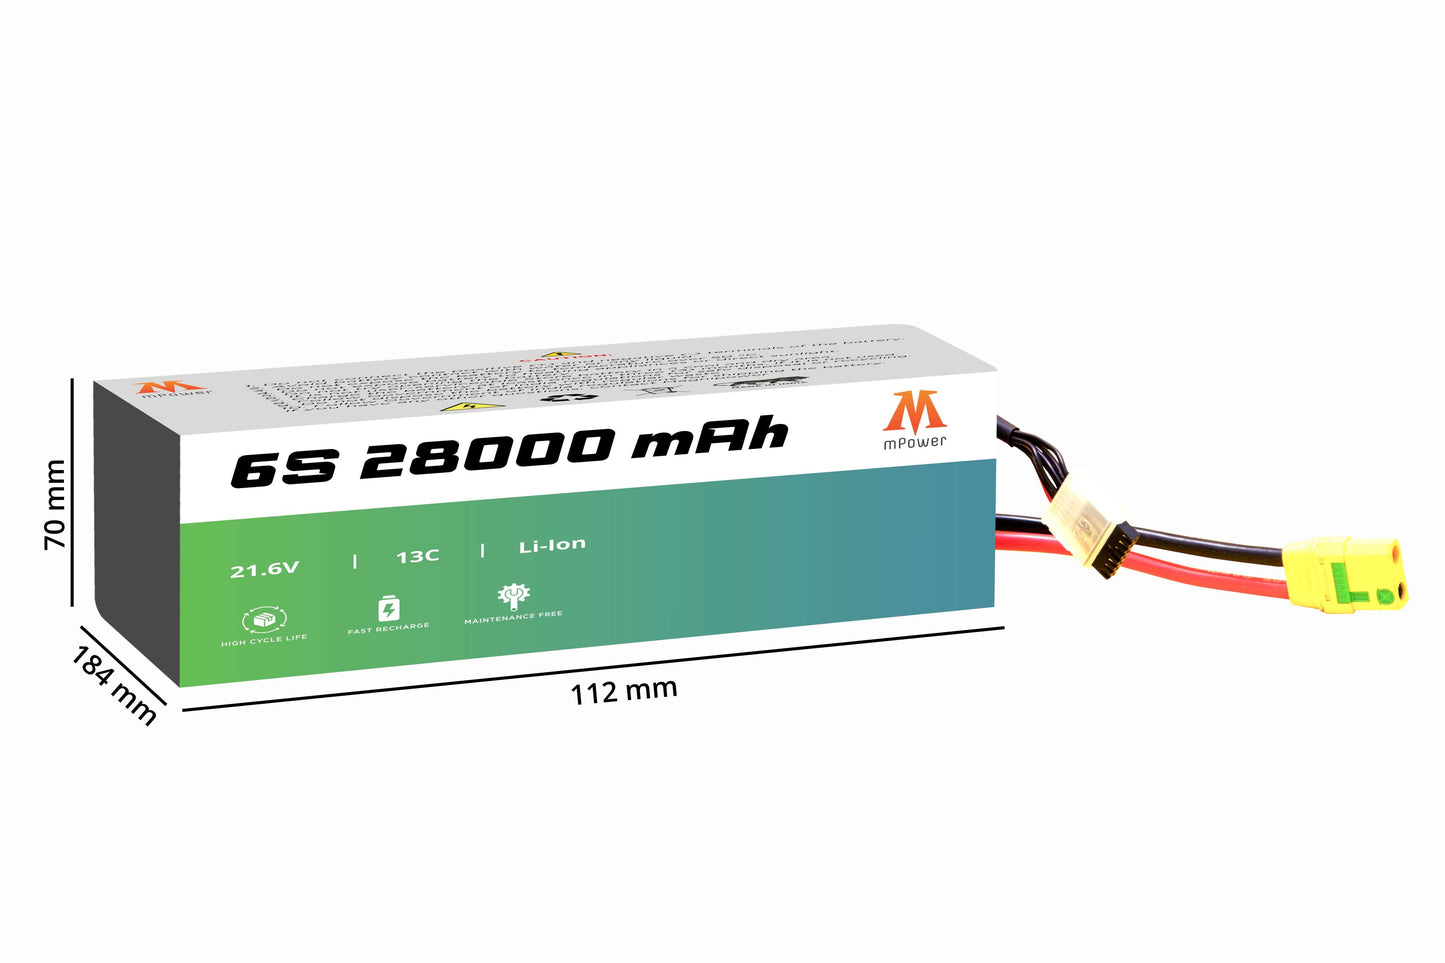 mPower 6S 28000mAh Lithium-Ion Battery for Survey Drones-mpowerlithium